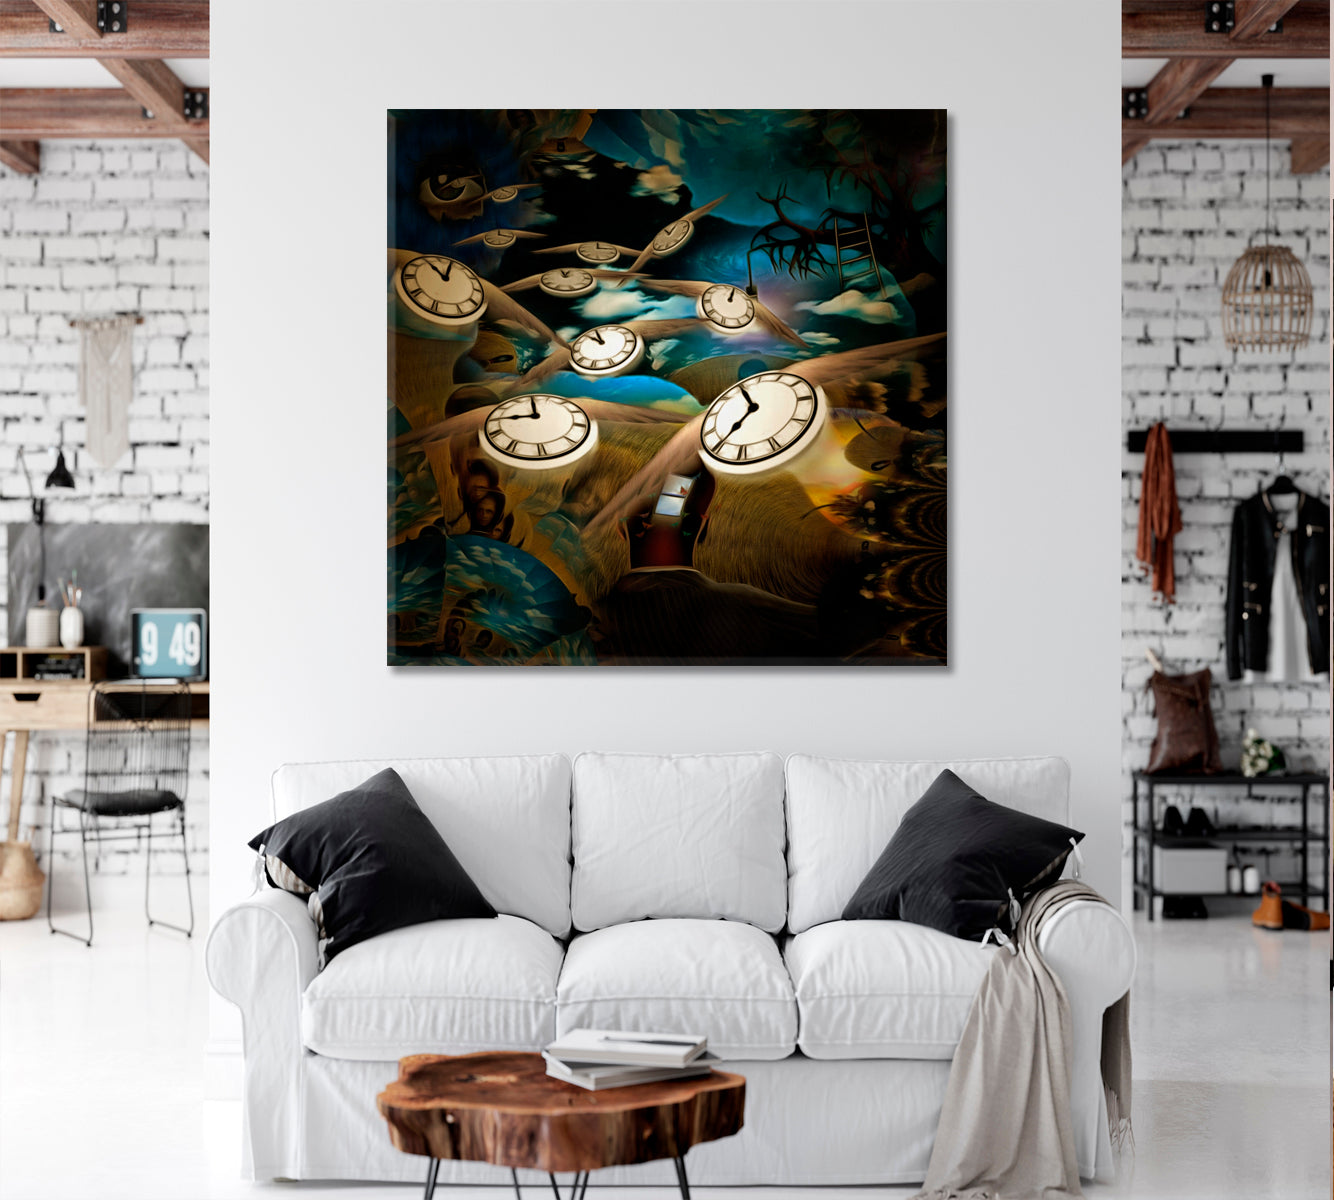 FLOW OF TIME Lord Eye And Winged Clocks Surreal Painting Surreal Fantasy Large Art Print Décor Artesty   